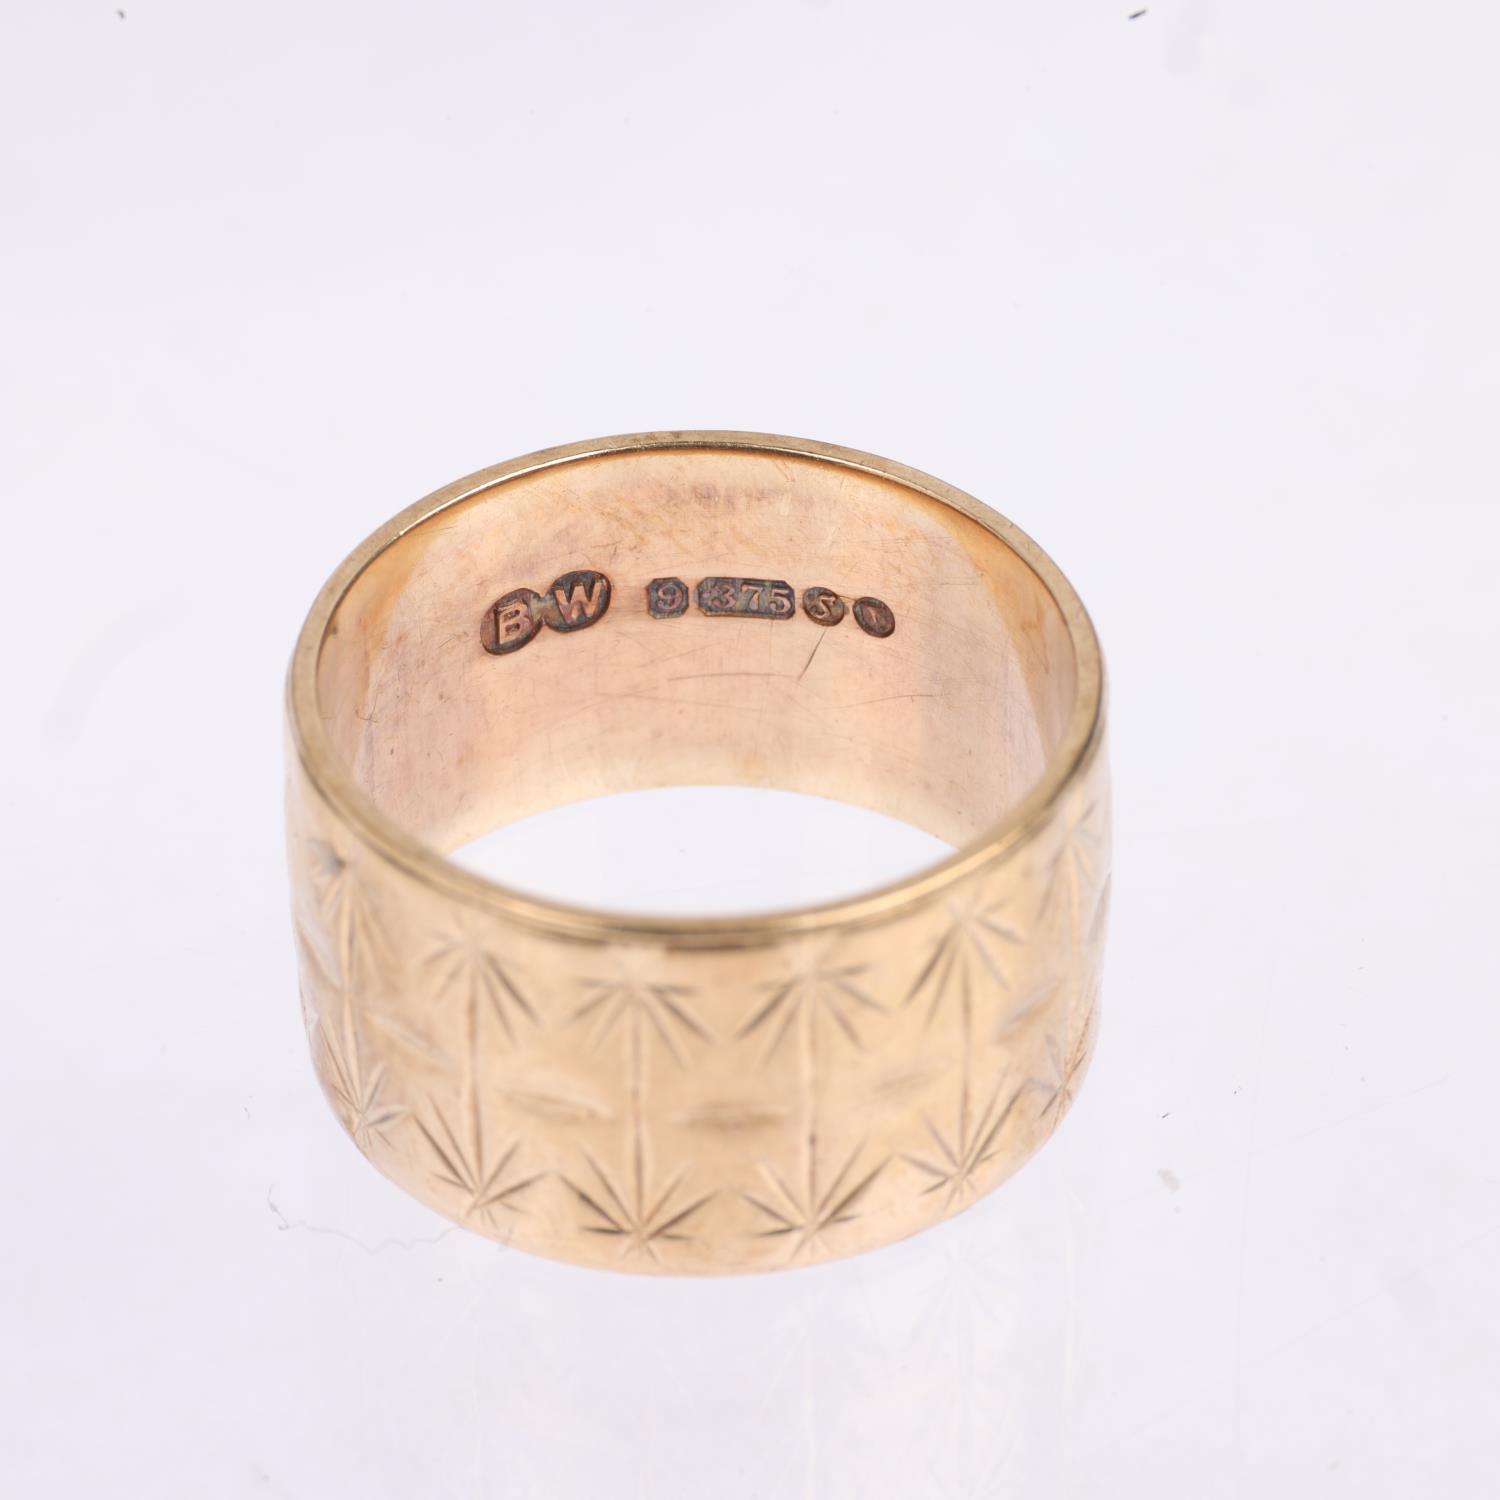 A late 20th century 9ct gold wedding band ring, maker BW, London 1973, engraved leaf decoration, - Image 3 of 4